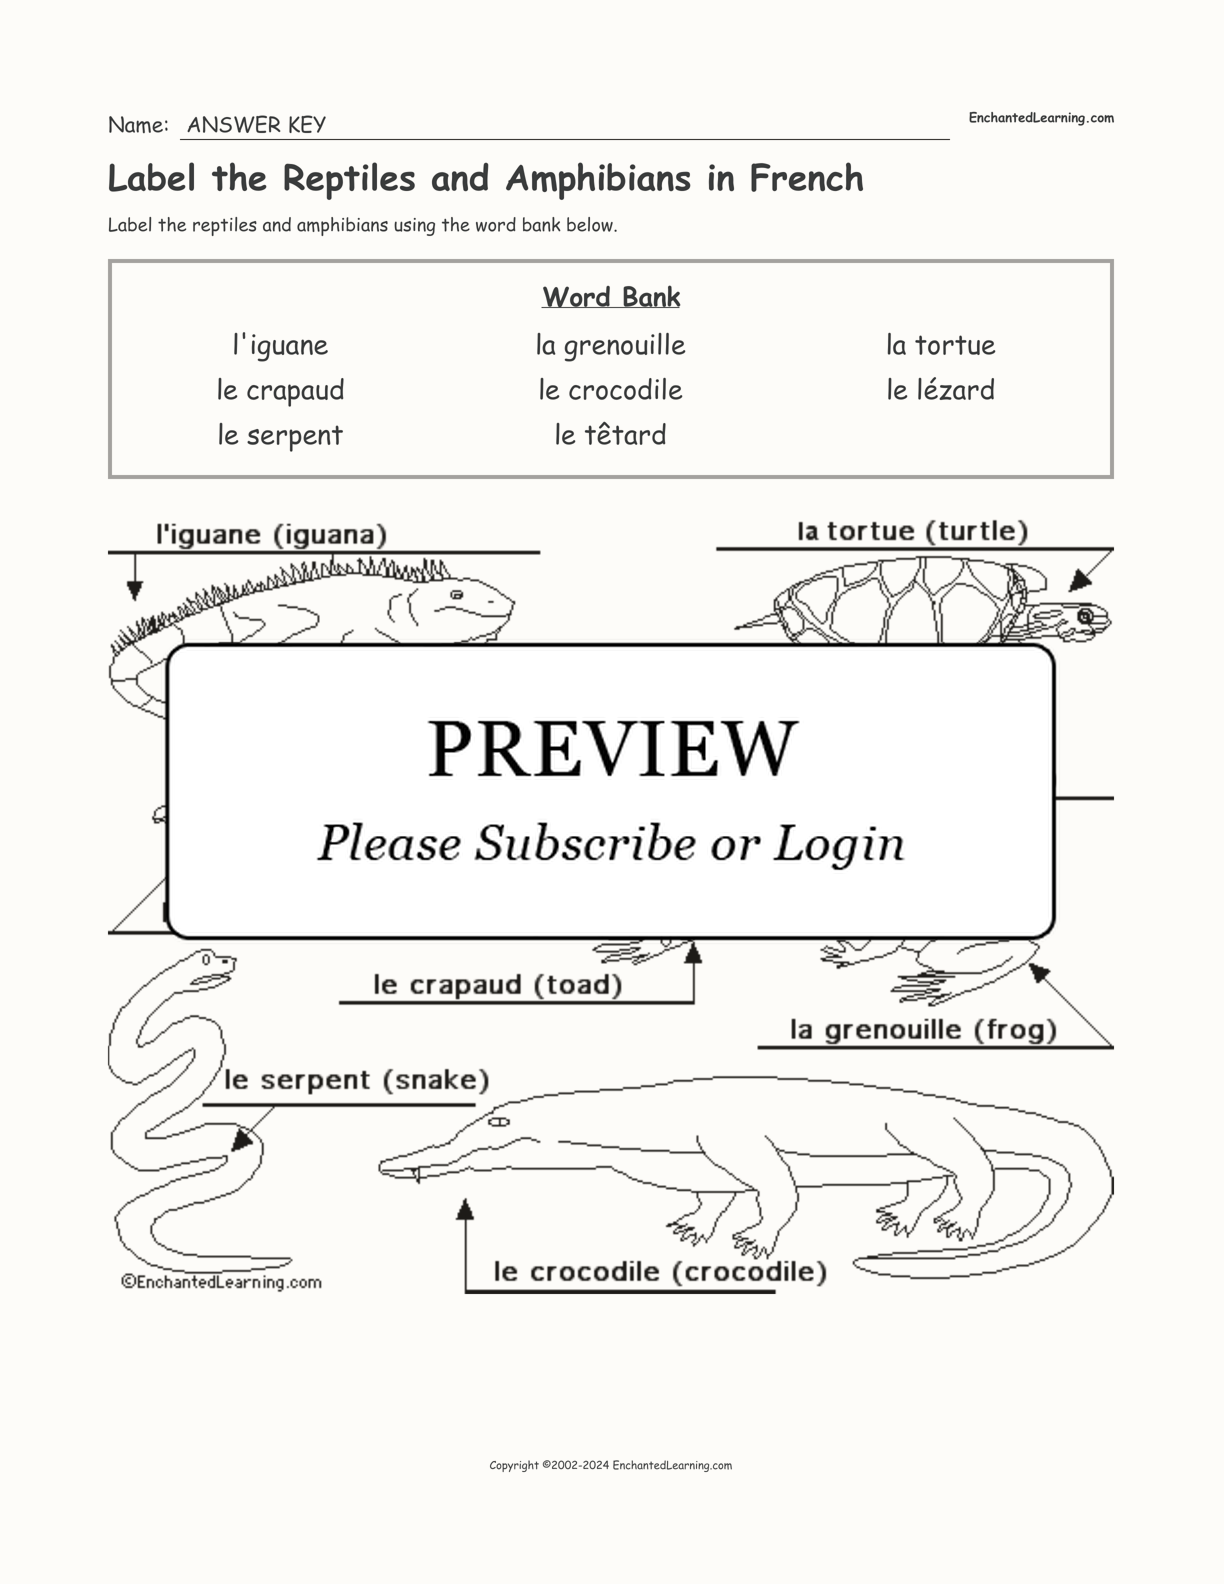 Label the Reptiles and Amphibians in French interactive worksheet page 2